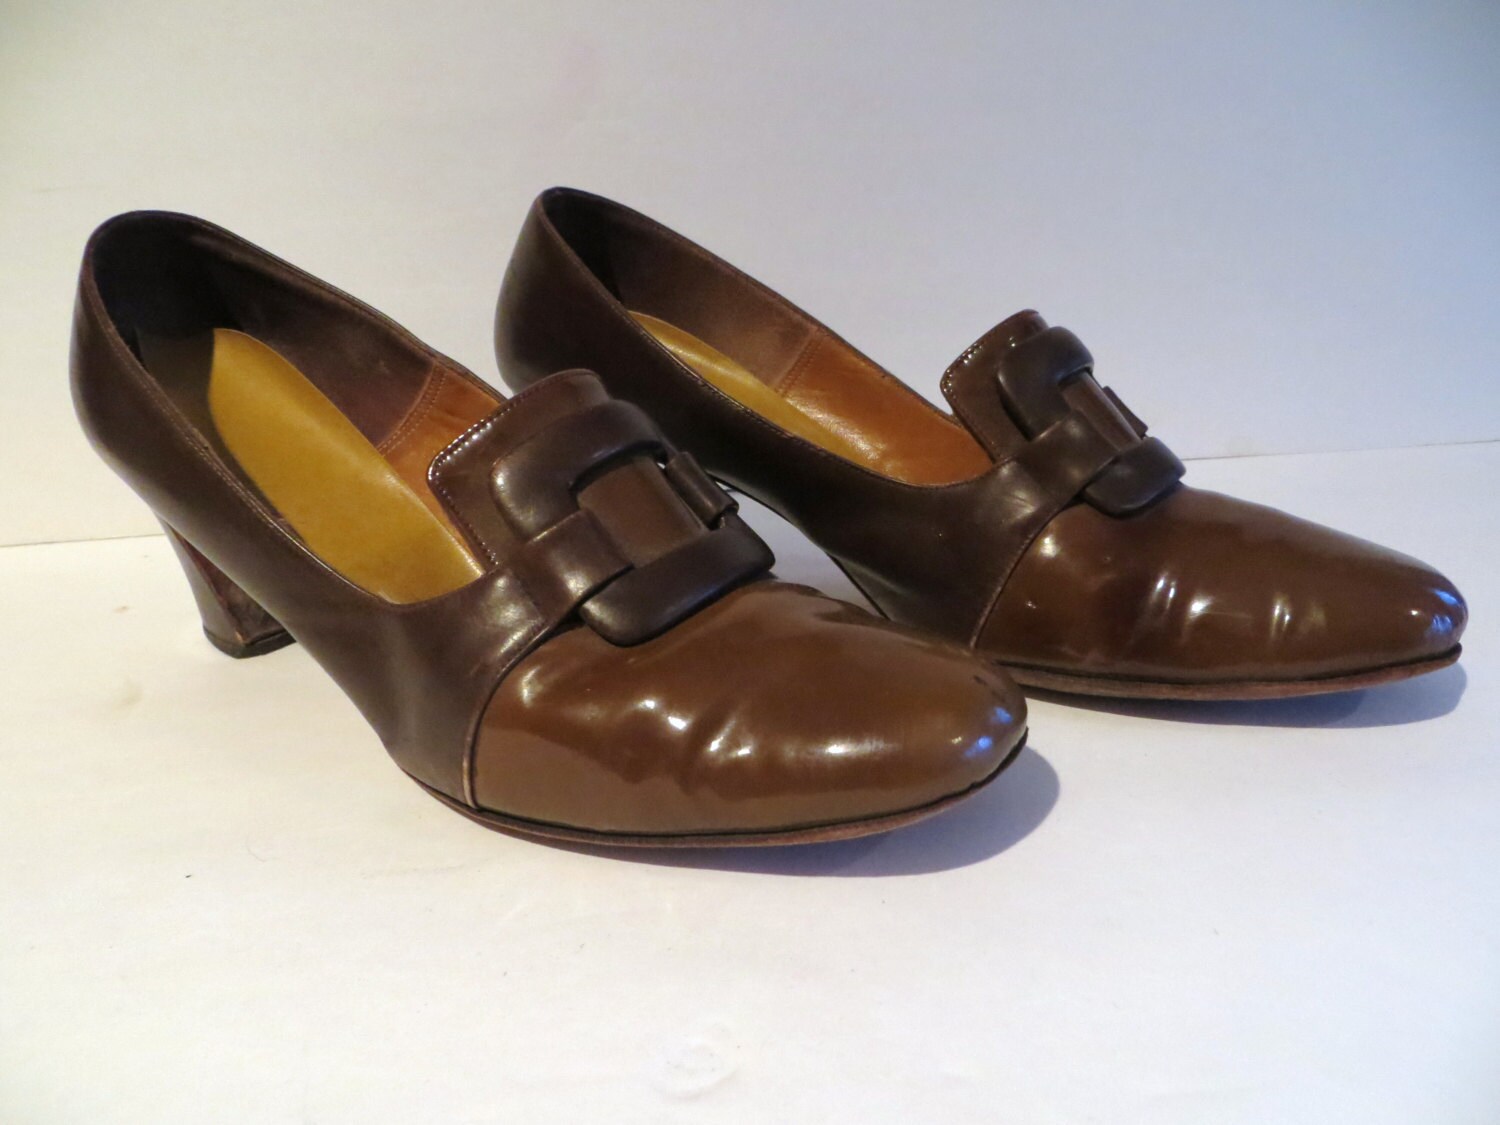 Vintage 50s womens shoes brown patent leather buckle